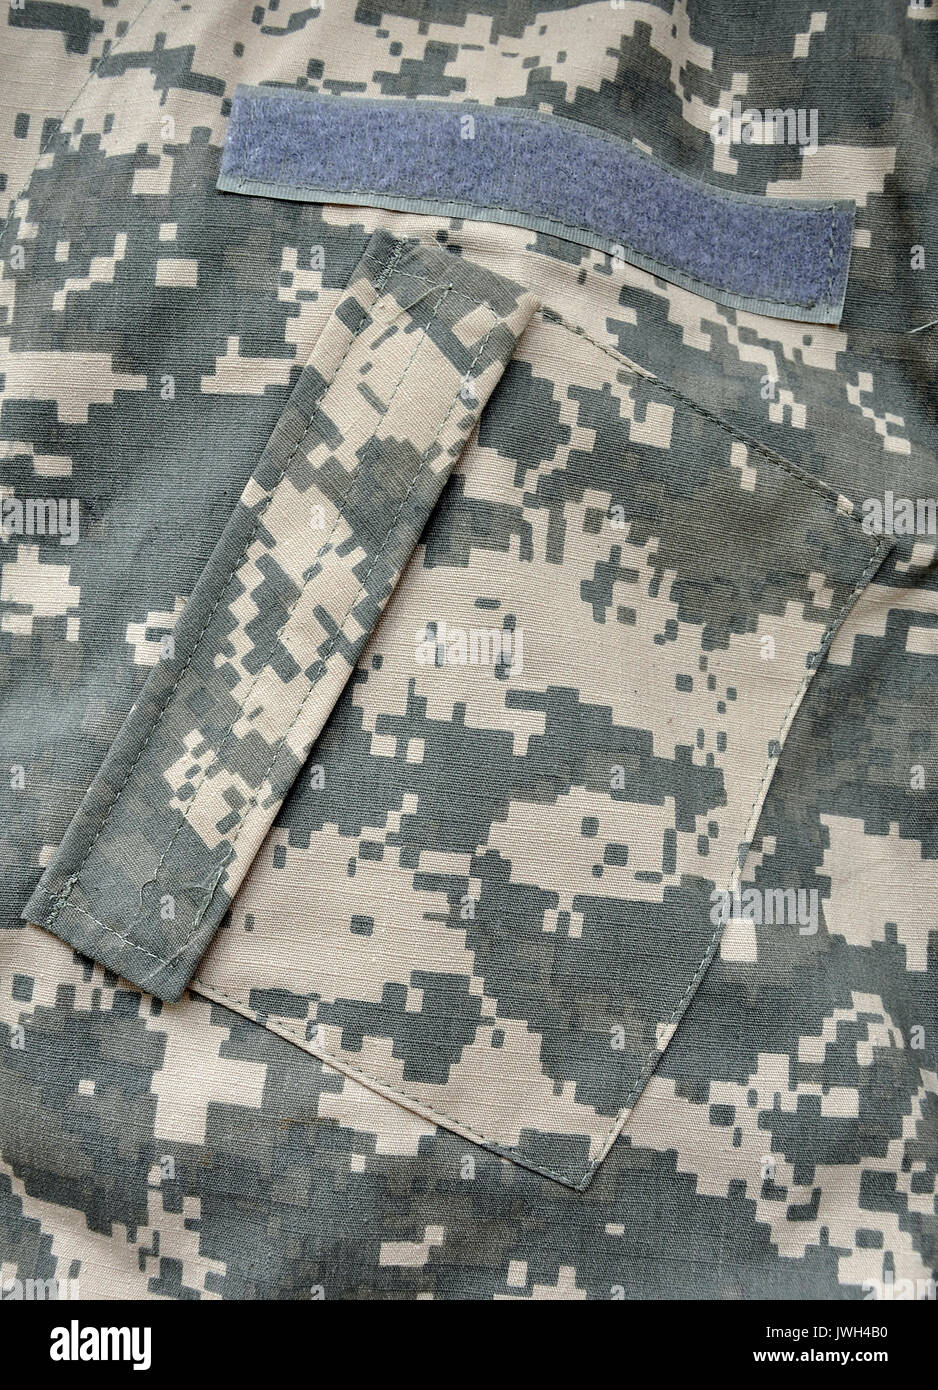 The Universal Camouflage Pattern (UCP), also referred to as ACUPAT (Army Combat Uniform PATtern) or Digital Camouflage ('digicam') is the military cam Stock Photo